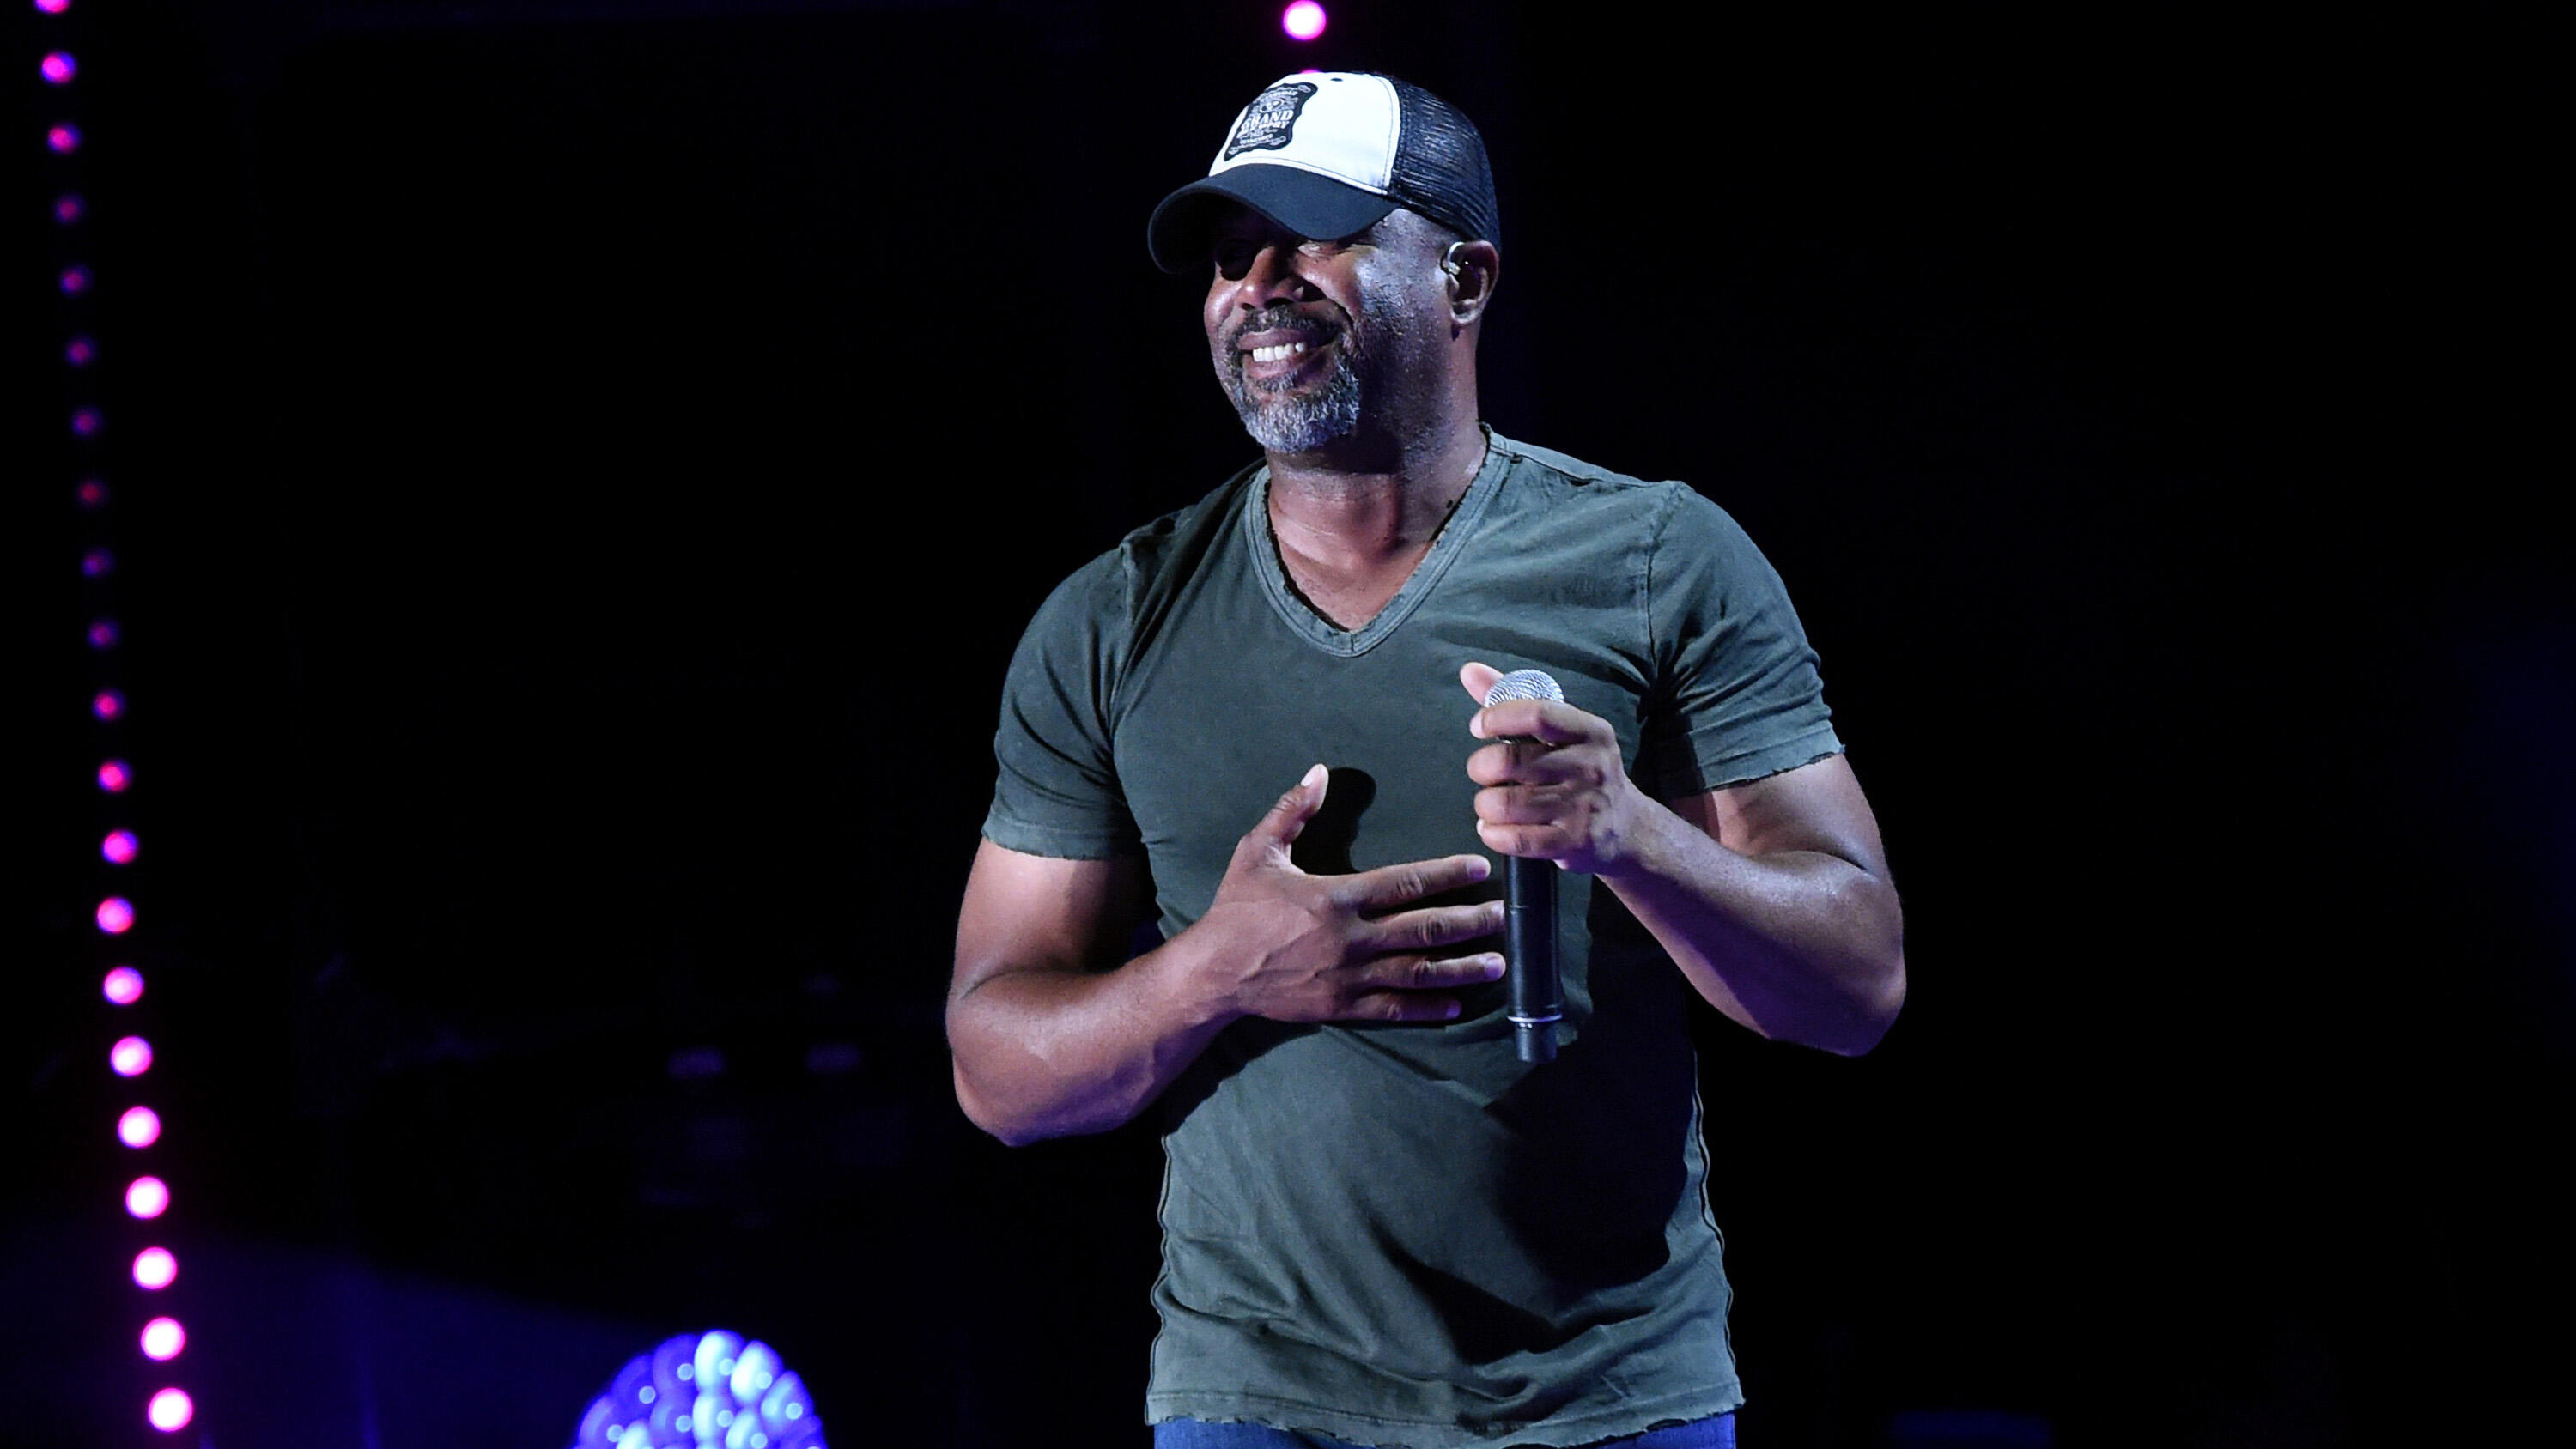 NASHVILLE, TN - JUNE 11:  (EDITORIAL USE ONLY)  Singer-songwriter Darius Rucker performs onstage during day 4 of the 2017 CMA Music Festival on June 11, 2017 in Nashville, Tennessee.  (Photo by Rick Diamond/Getty Images)